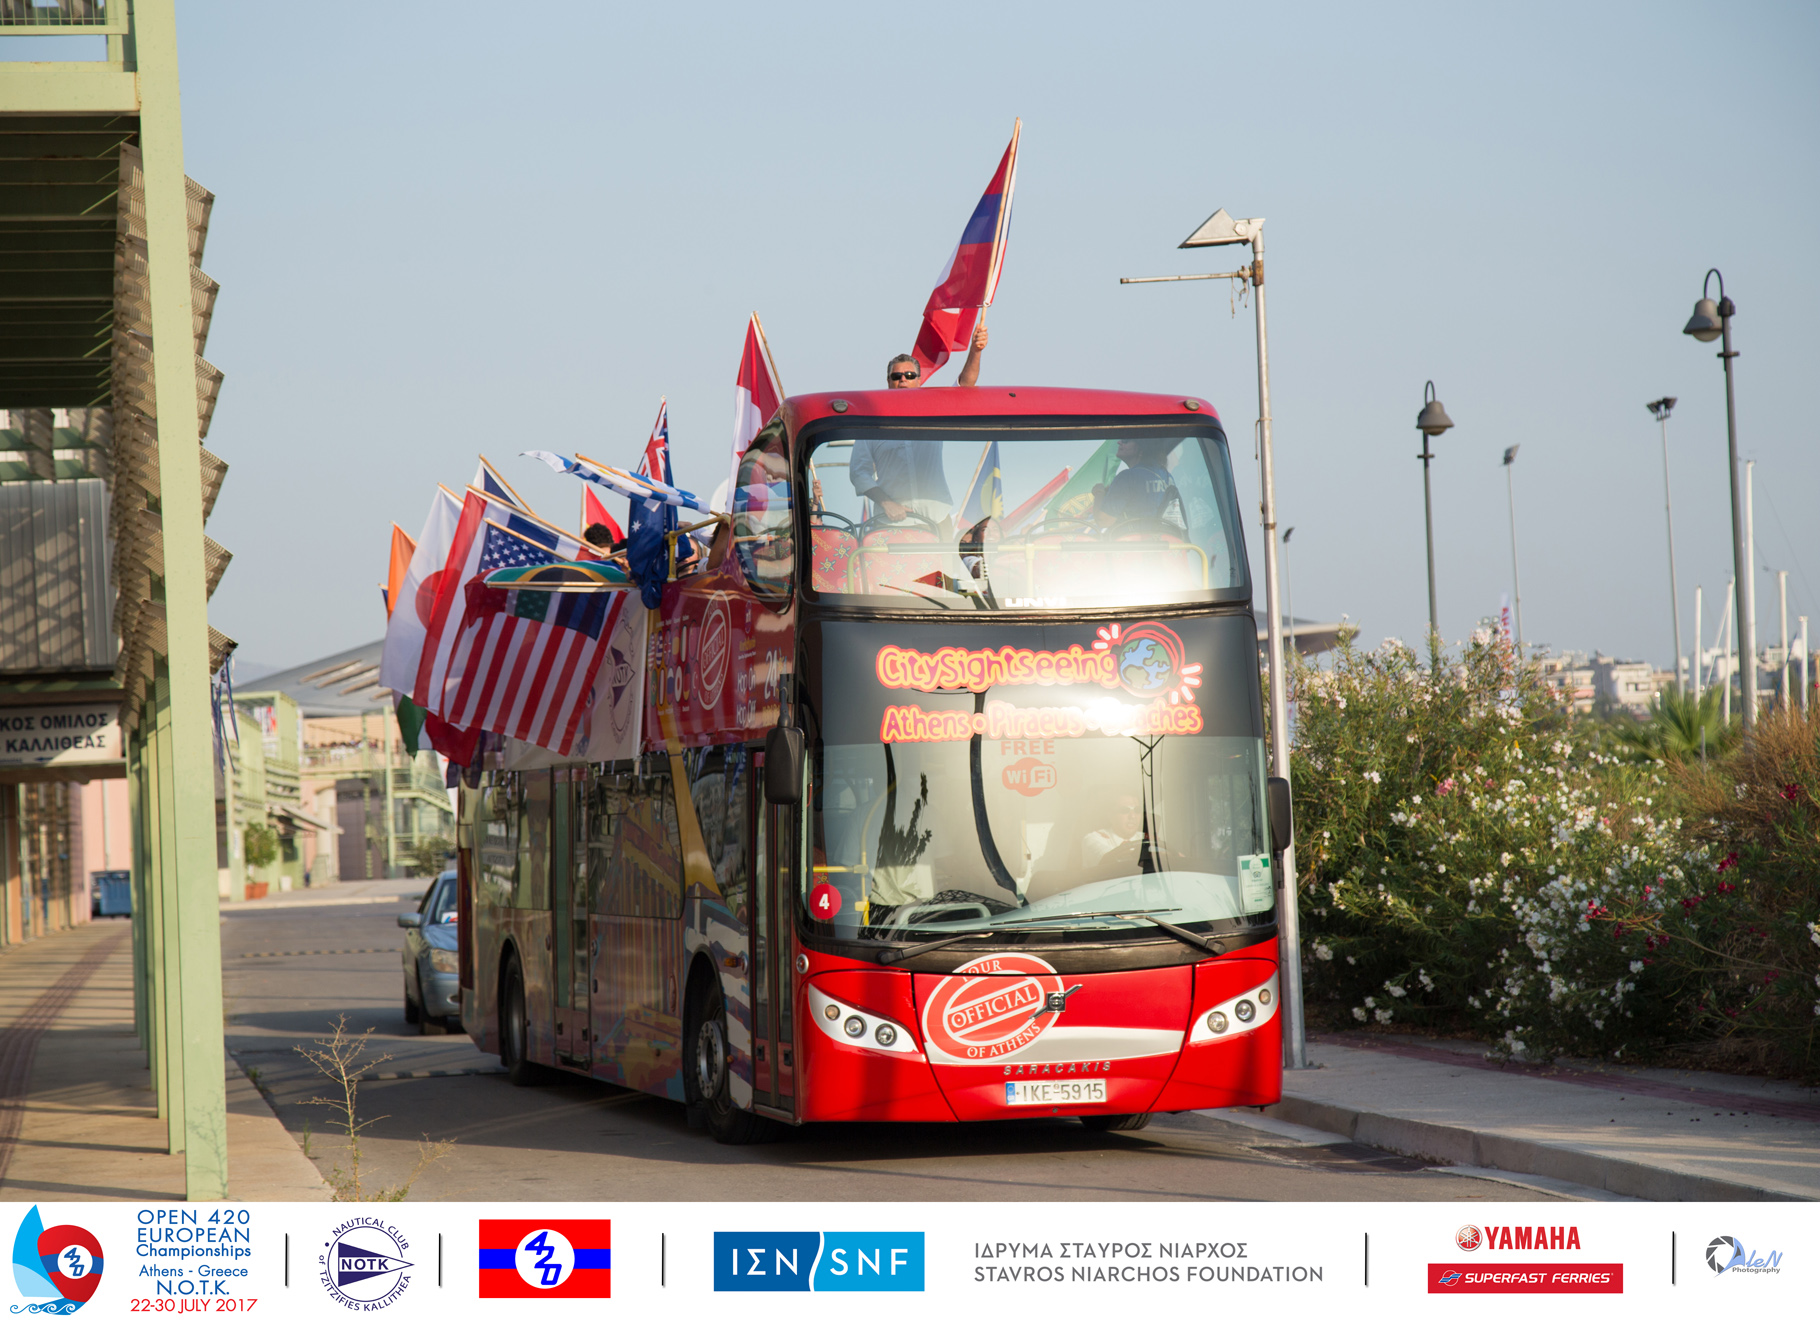 National Flags waving on open top bus